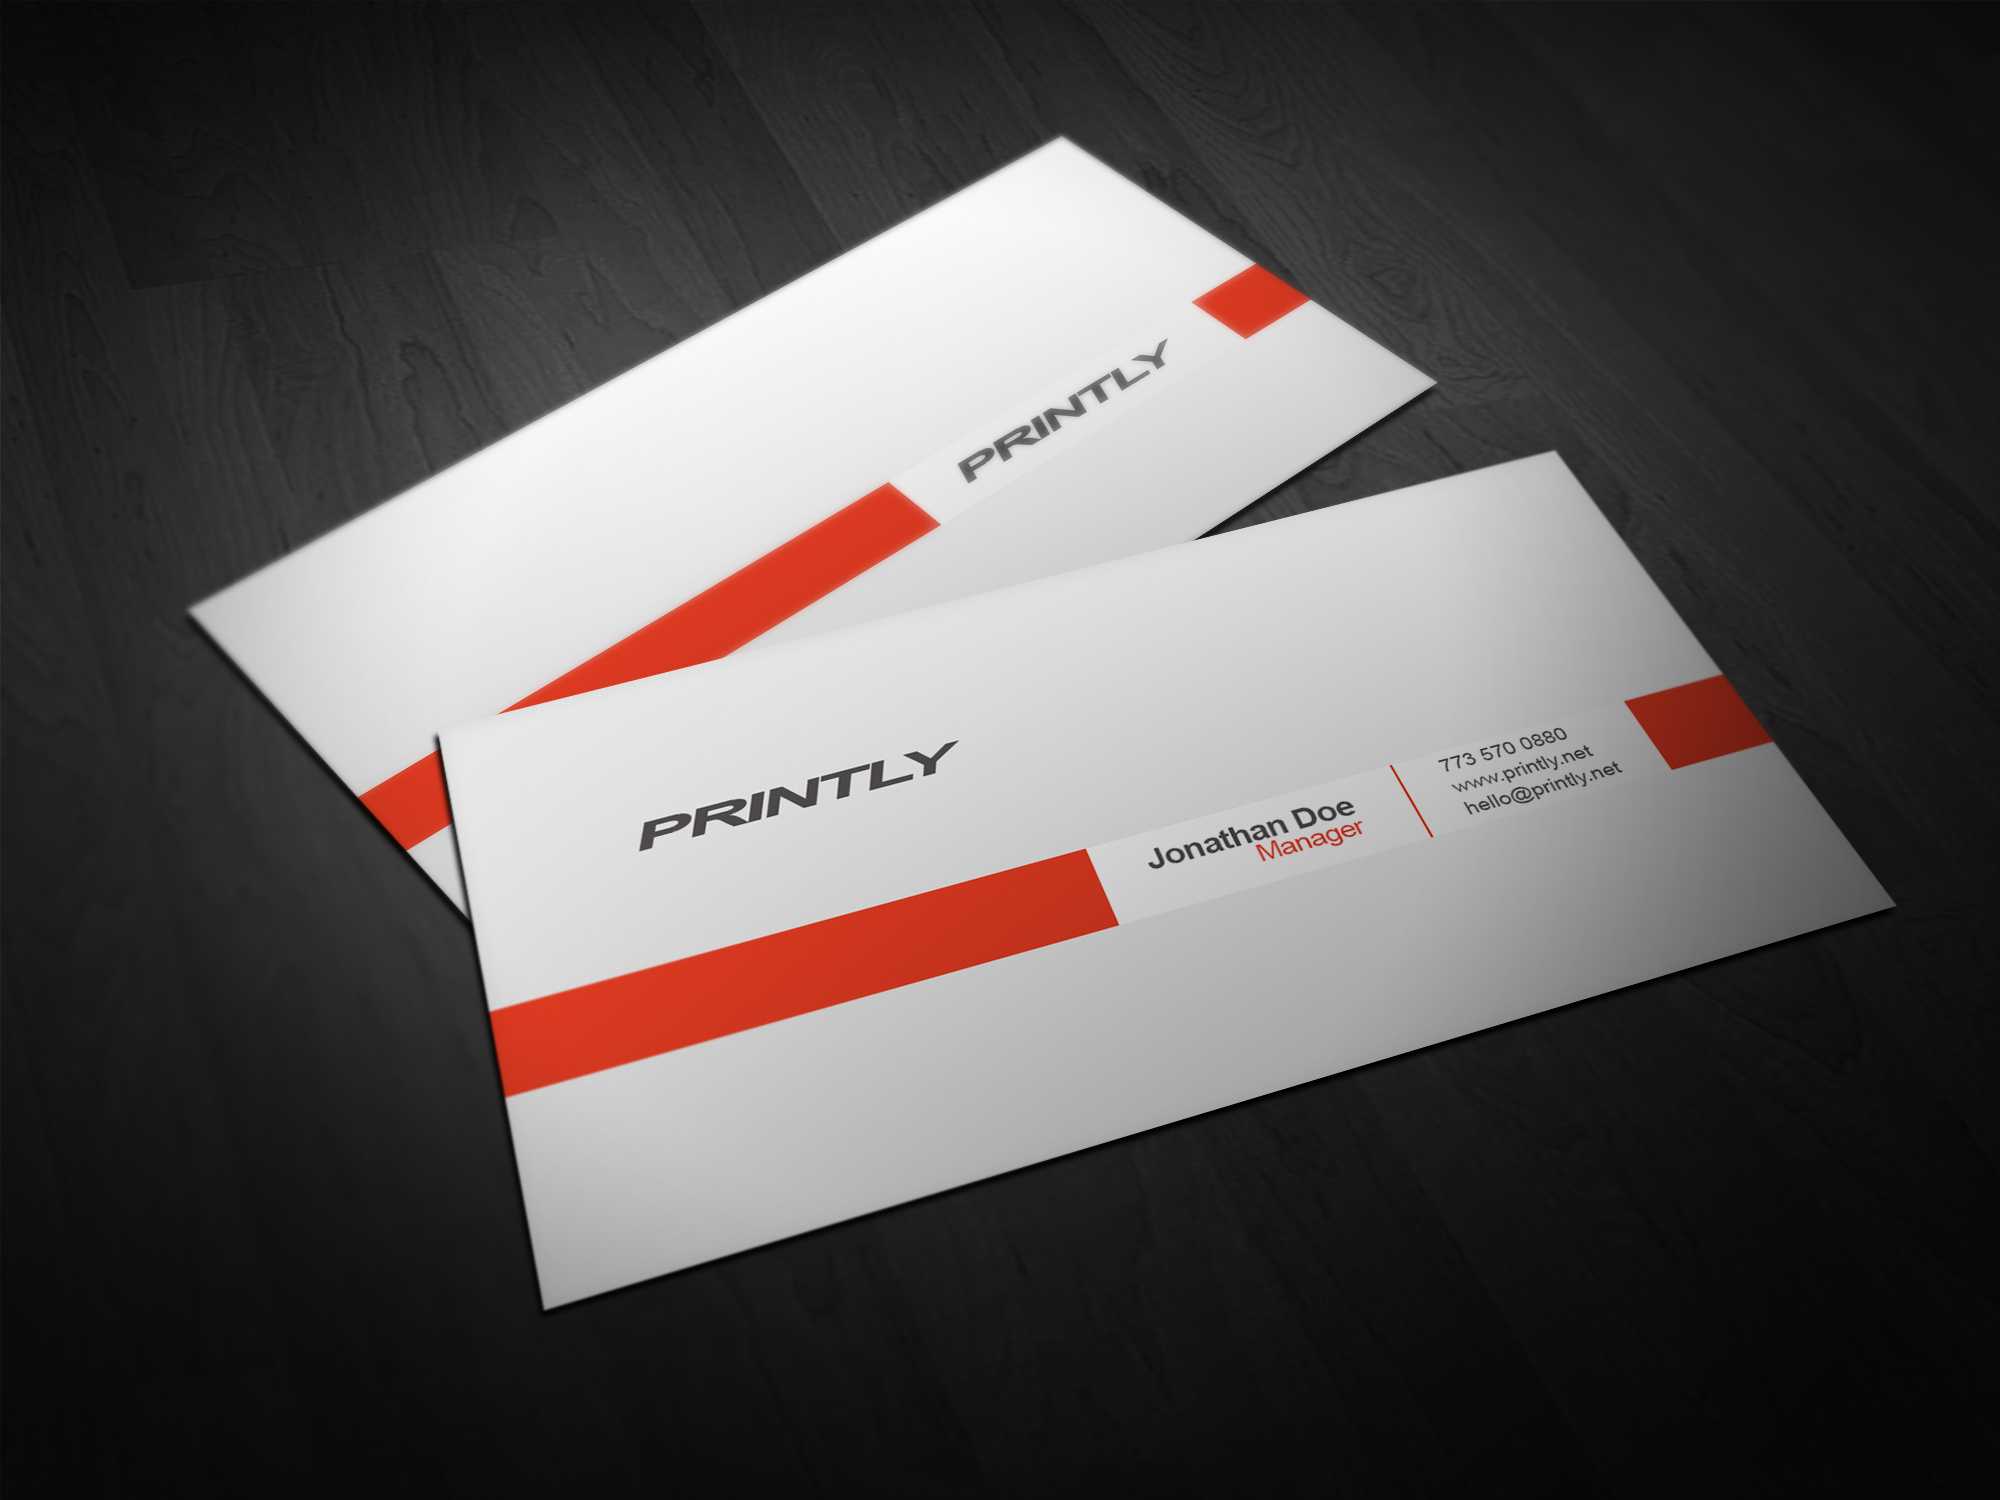 20 Free Psd Business Card Templates Images – Free Business With Regard To Free Template Business Cards To Print